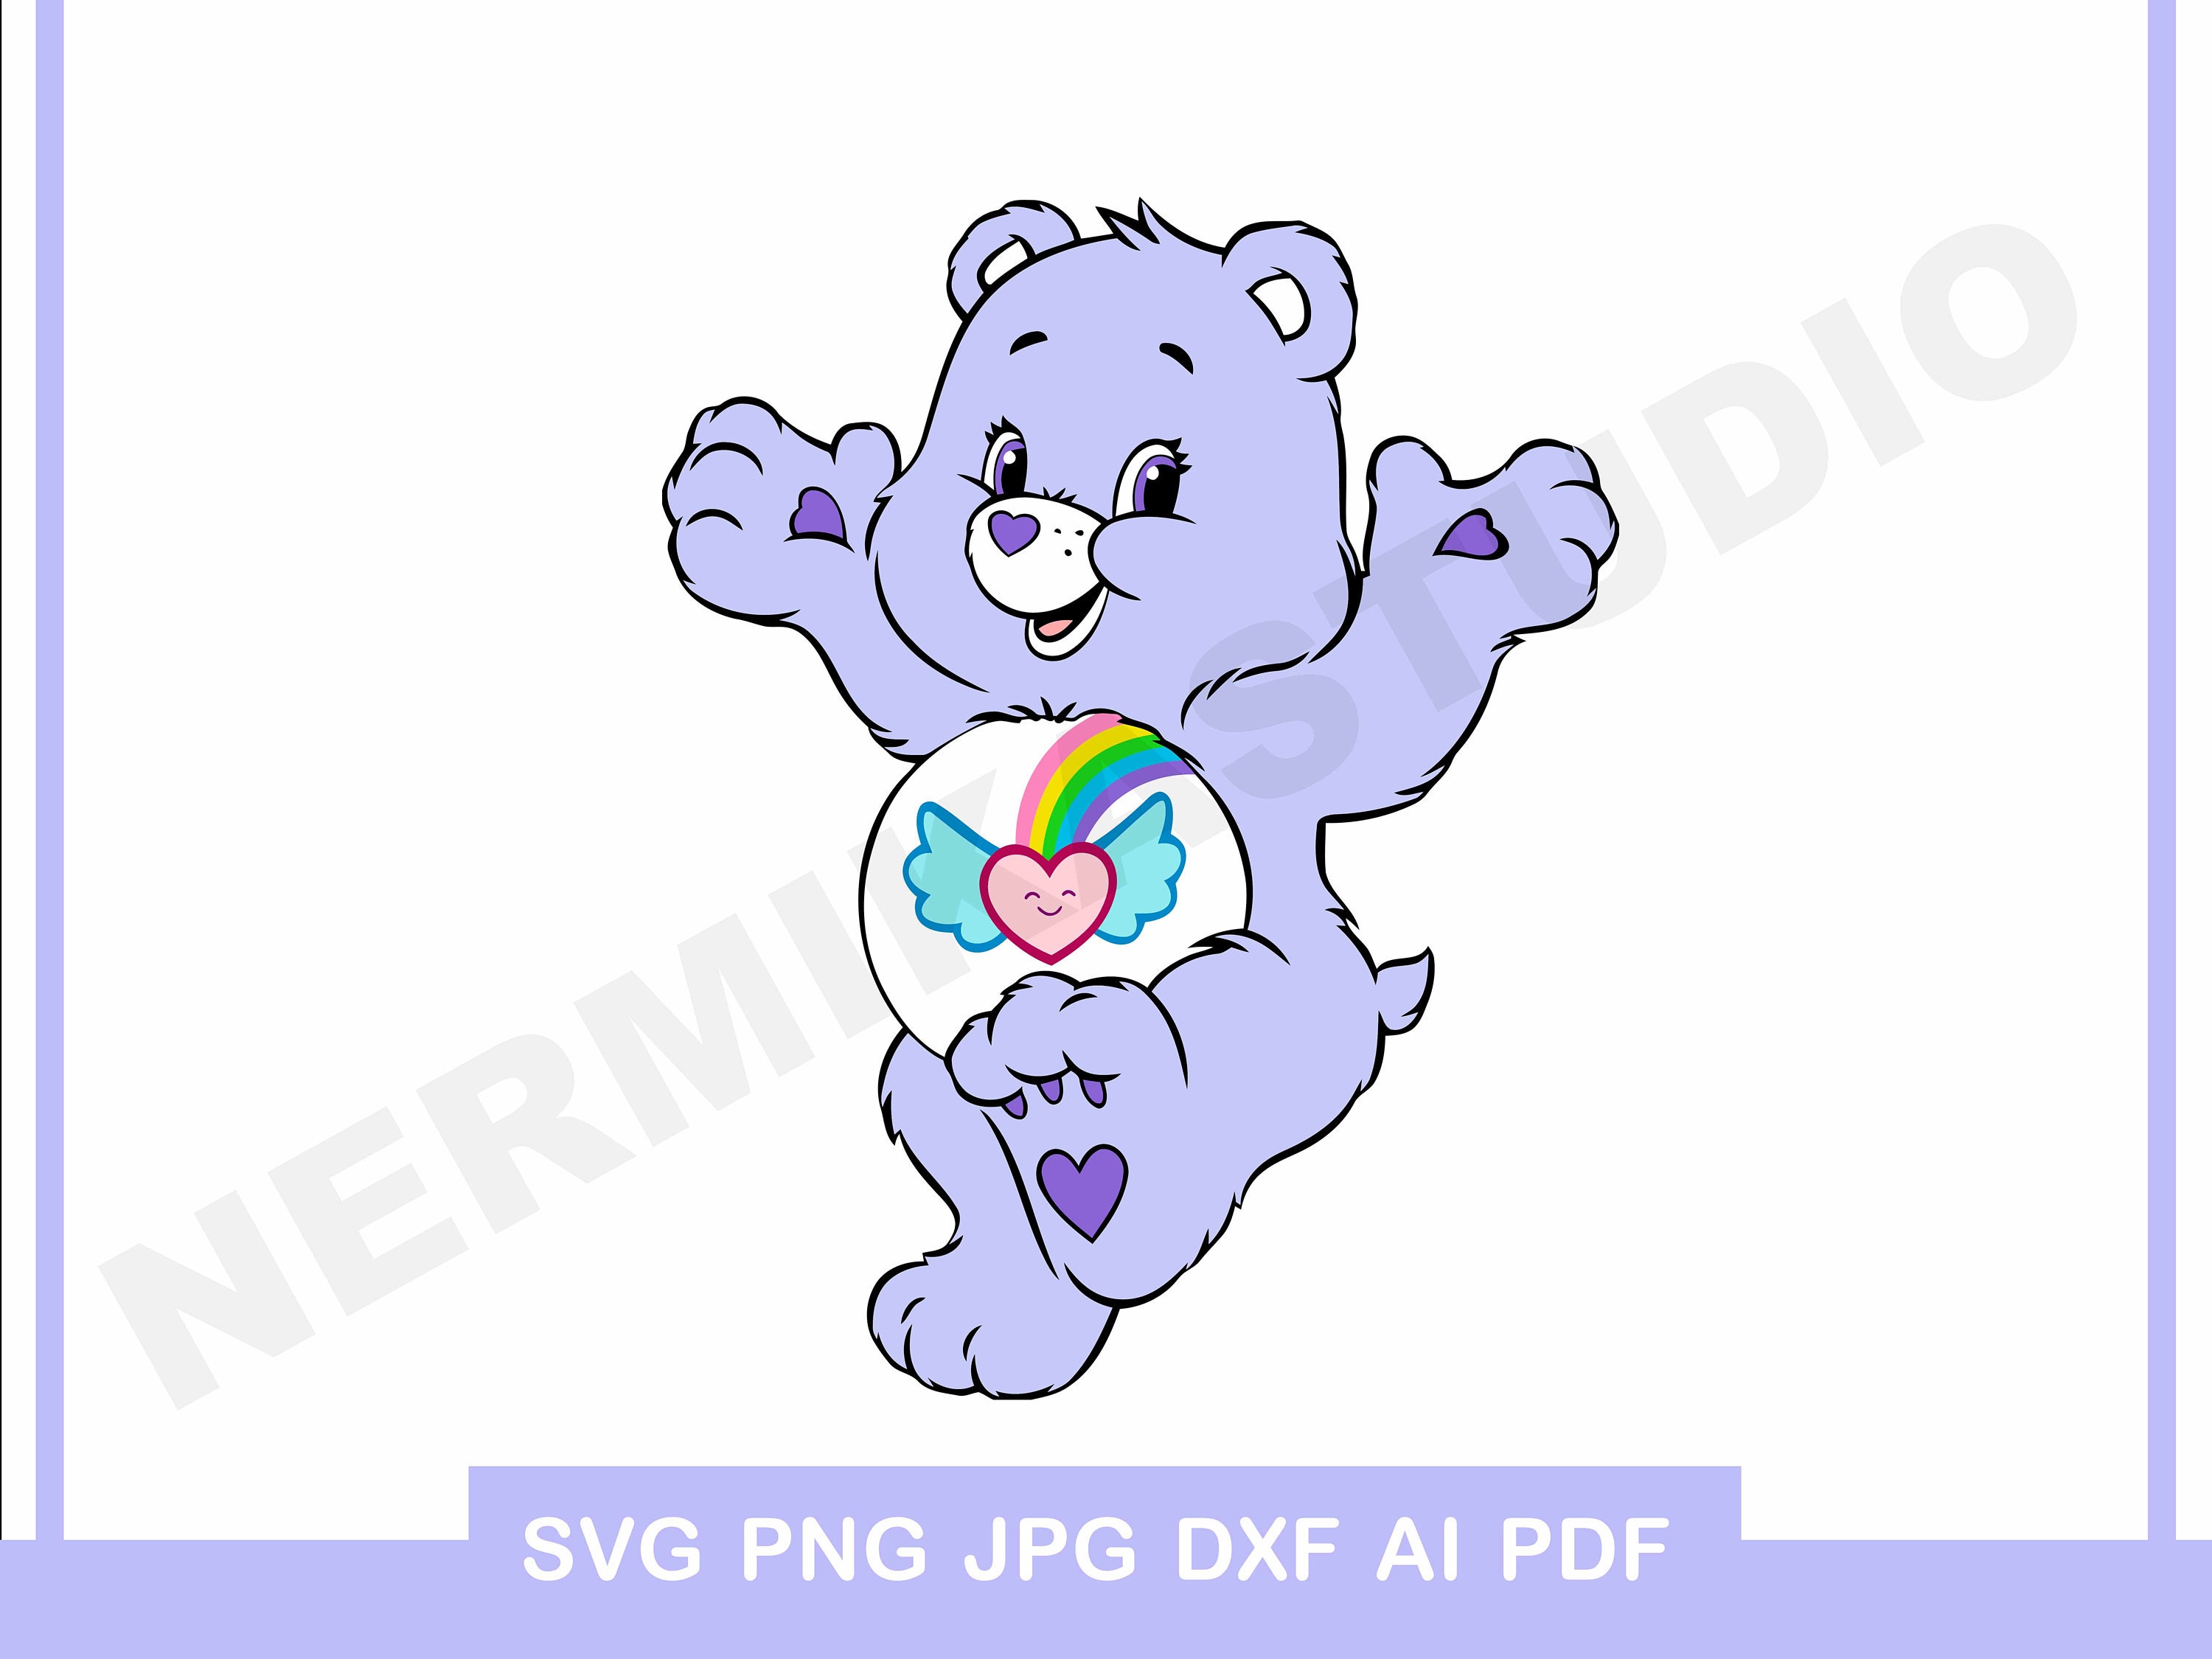 The Dream Bright Bear From Care Bears